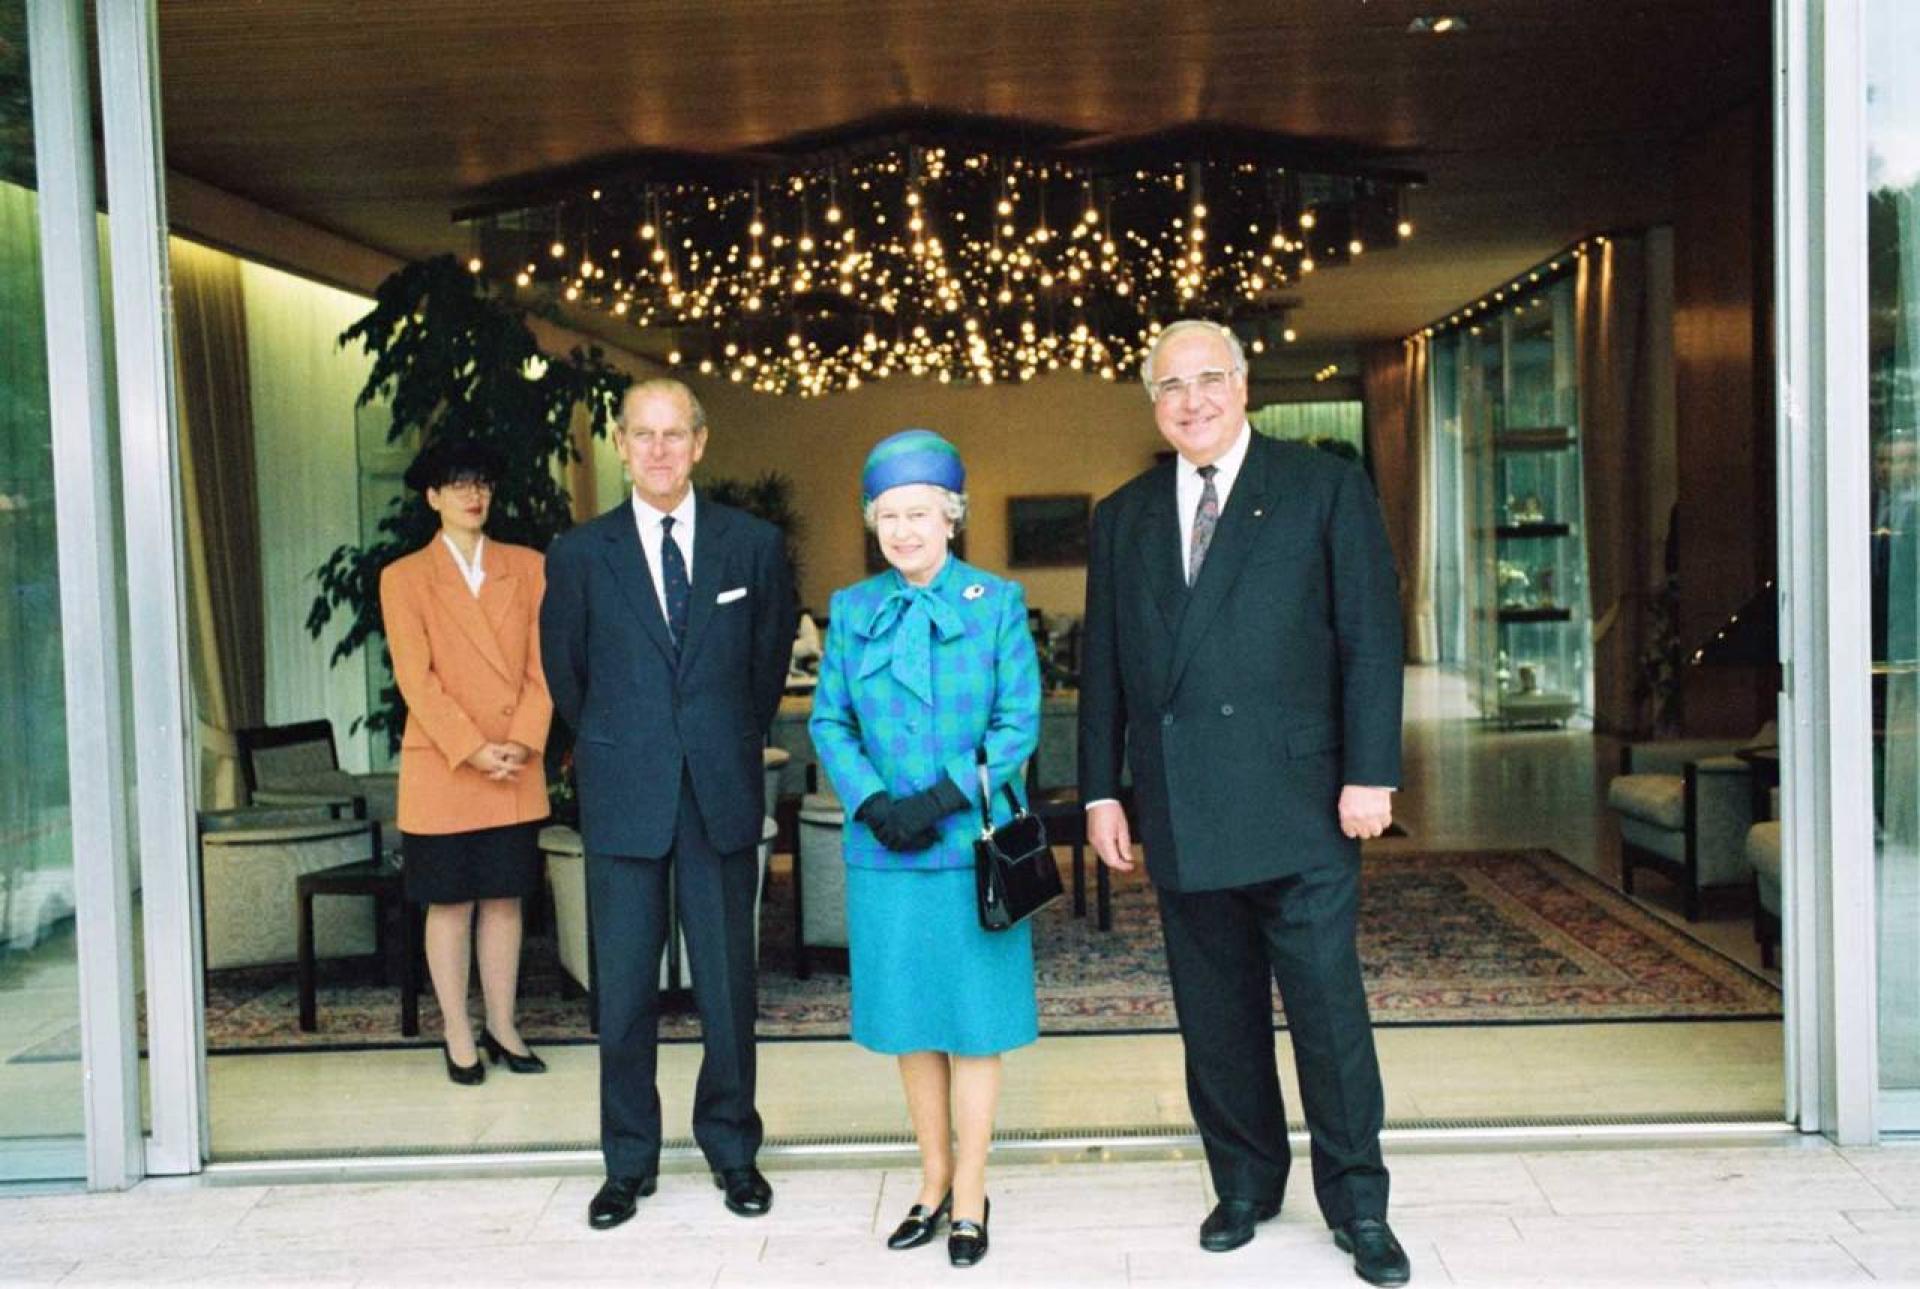 Prince Philip, Queen Elizabeth II and the ex-Chancellor of Germany Helmut Kohl front of the bungalow of the Chancellor in Bonn.